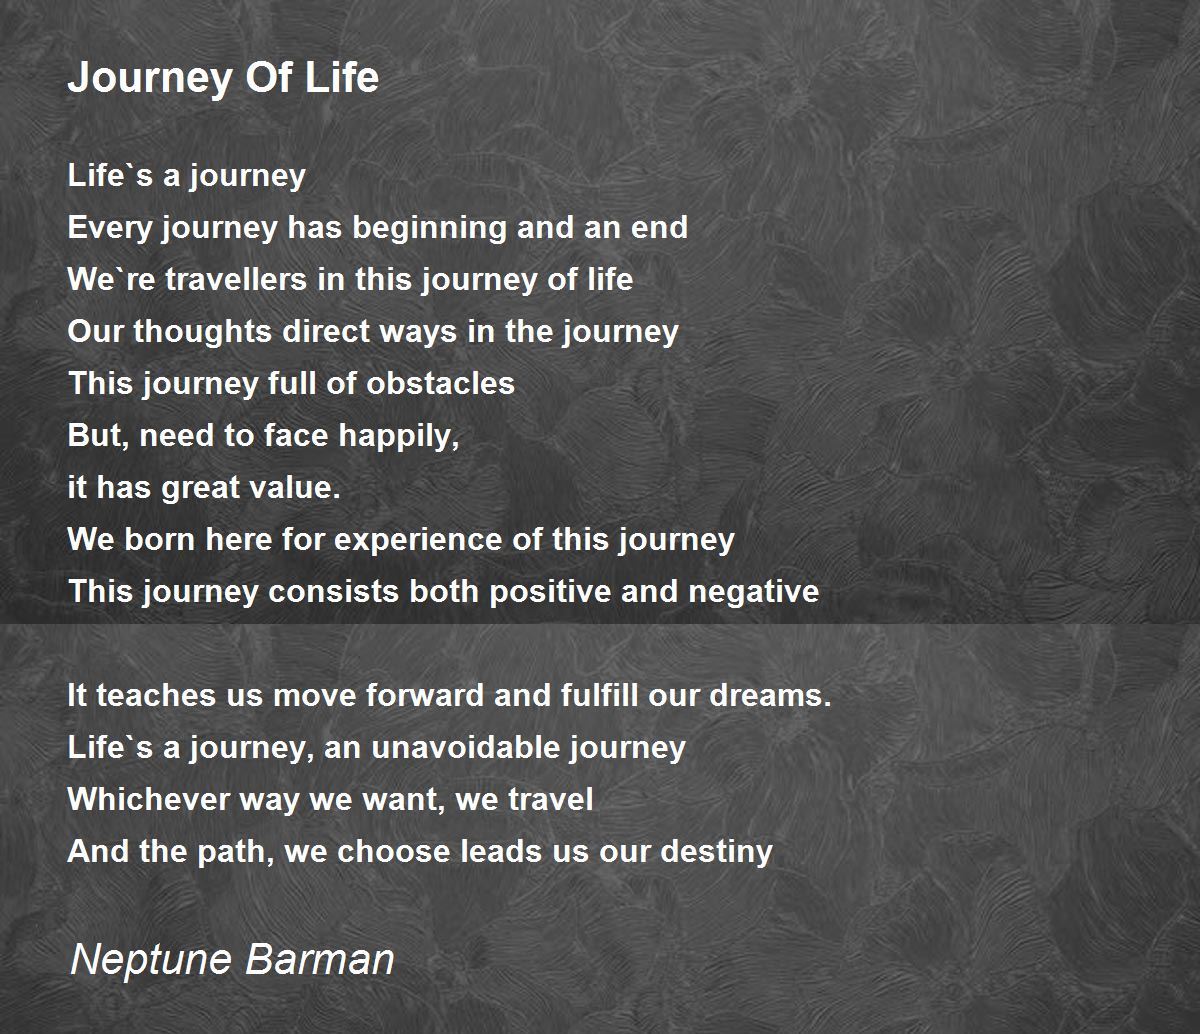 the journey of my life essay 300 words